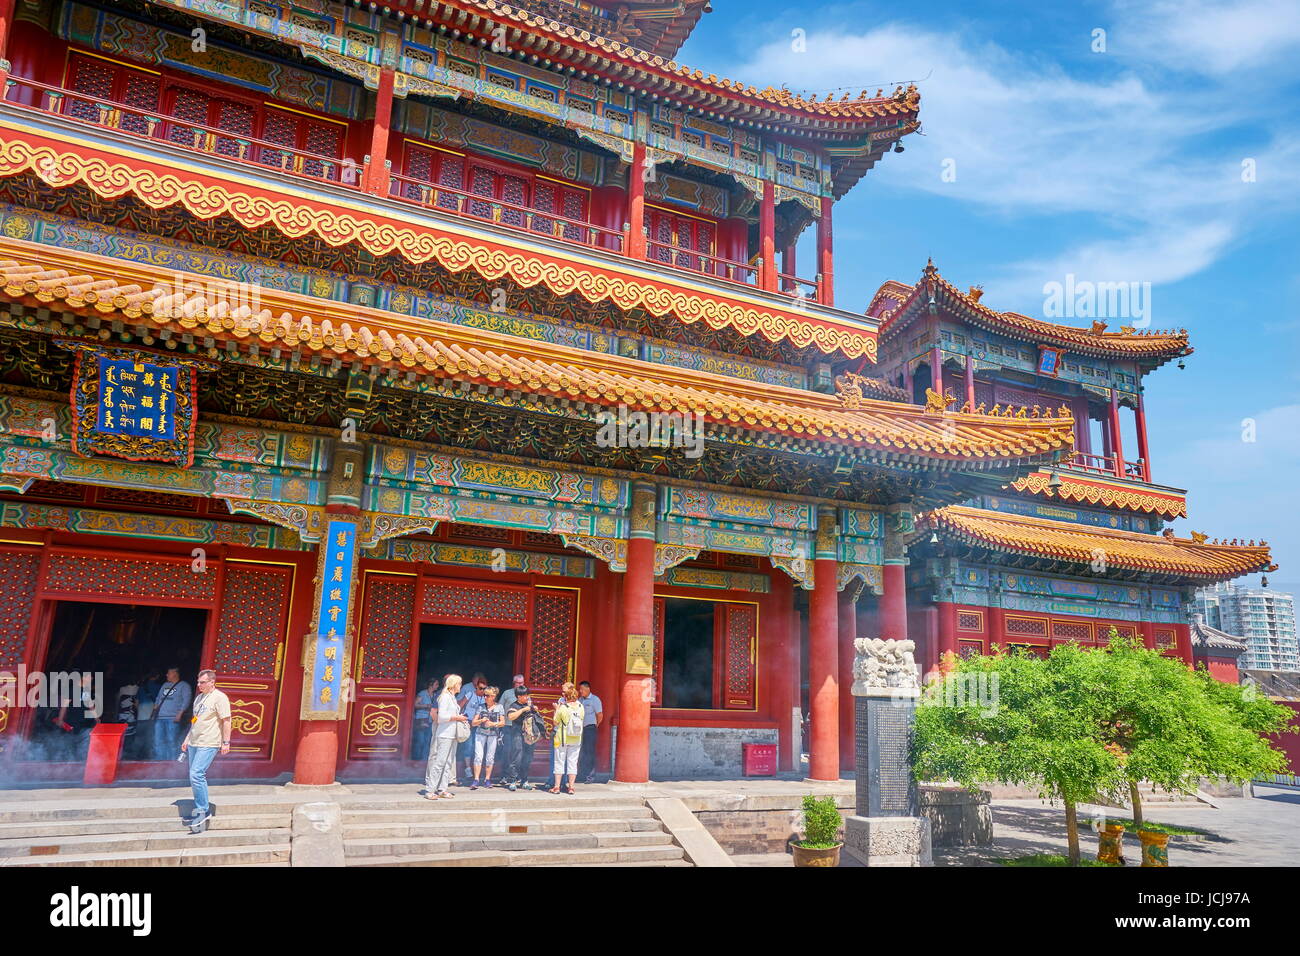 Yonghe Gong, Lama Temple Bouddhiste, Beijing, Chine Banque D'Images